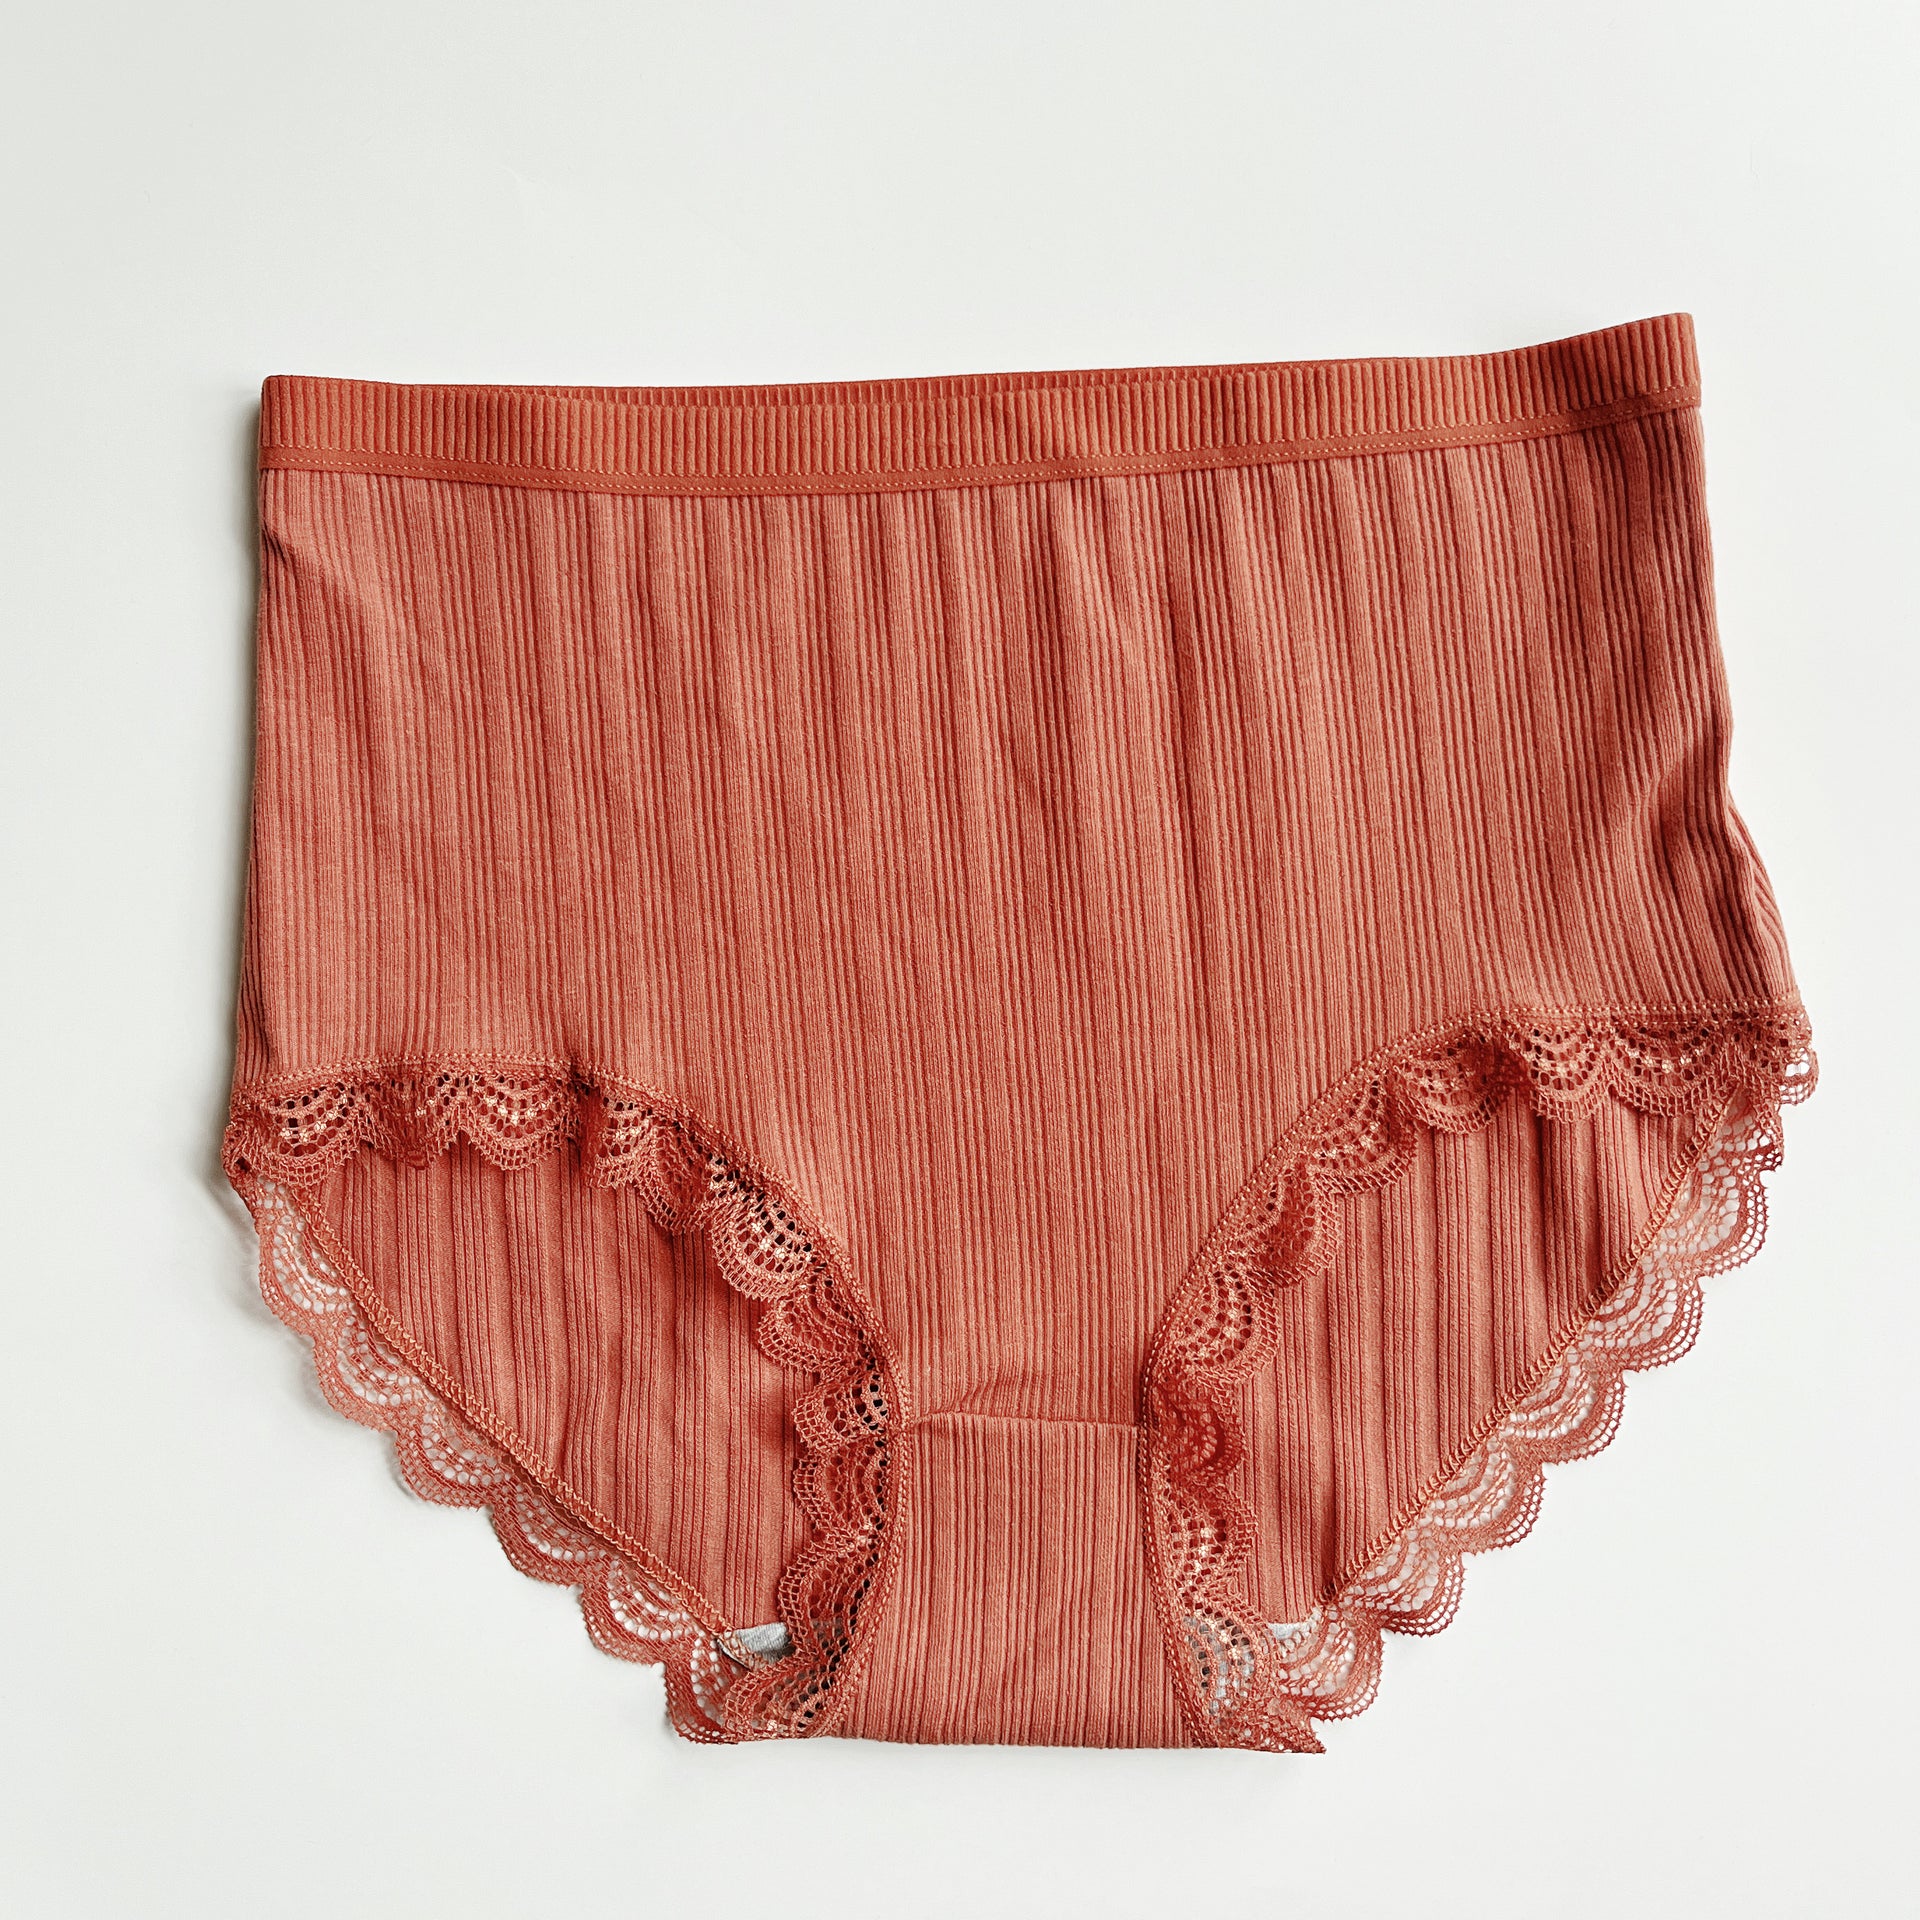 Pure 100% Organic Cotton Lace Panties. Sustainable Womens